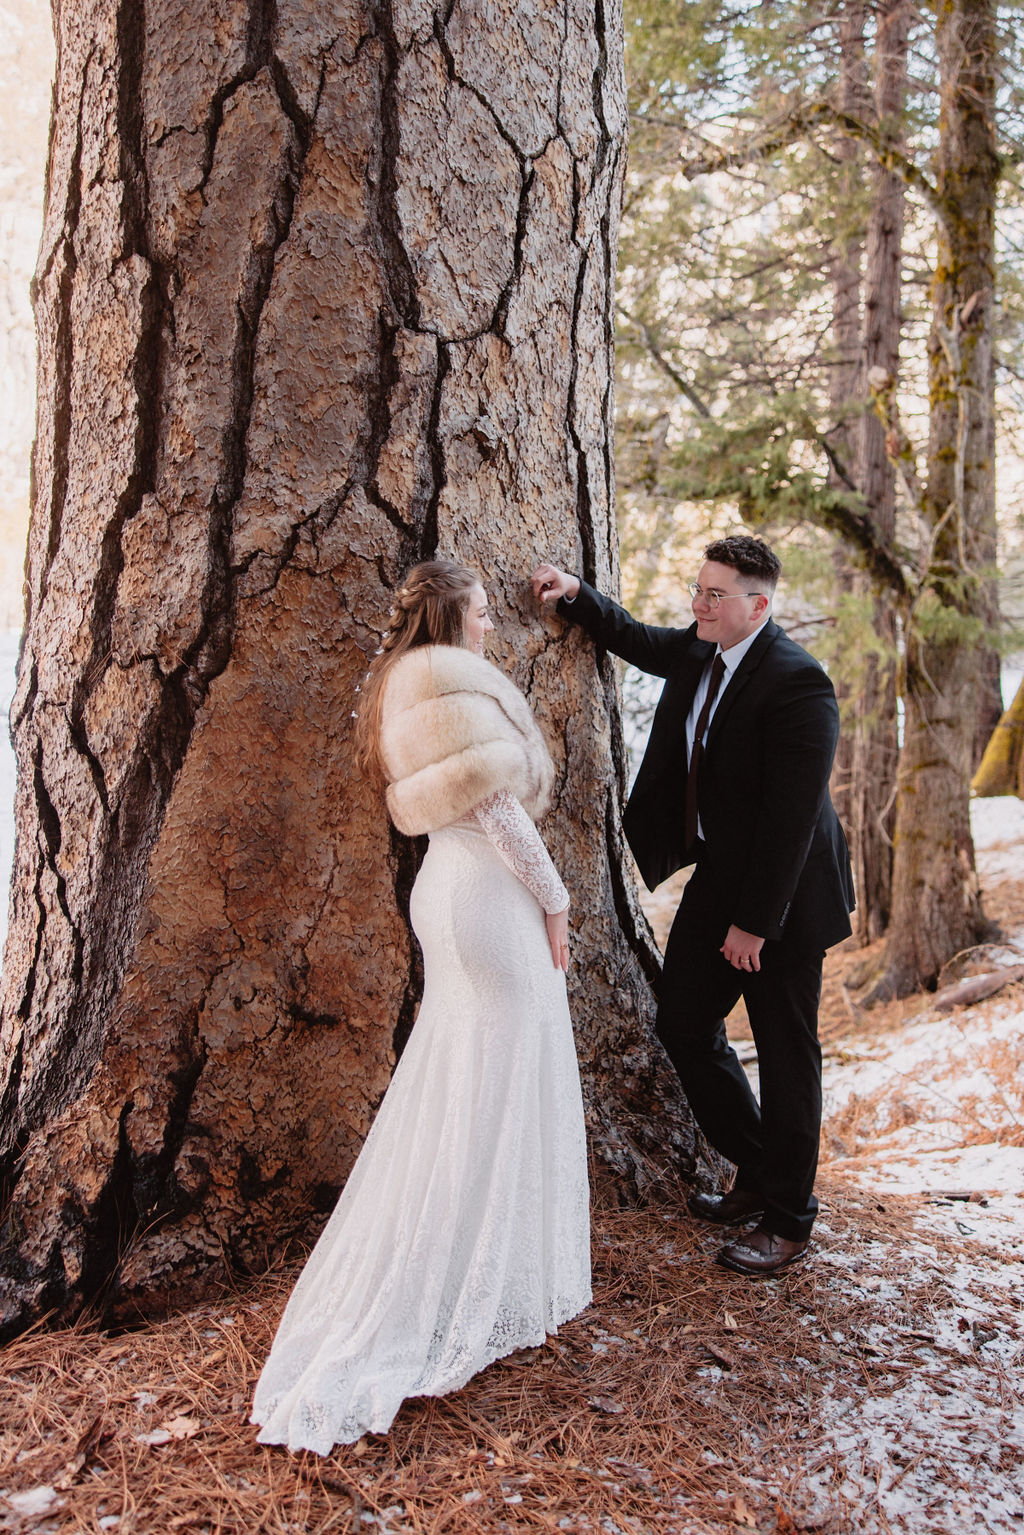 A couple dressed in wedding attire standing by a large tree in a snowy landscape at Yosemite National Park